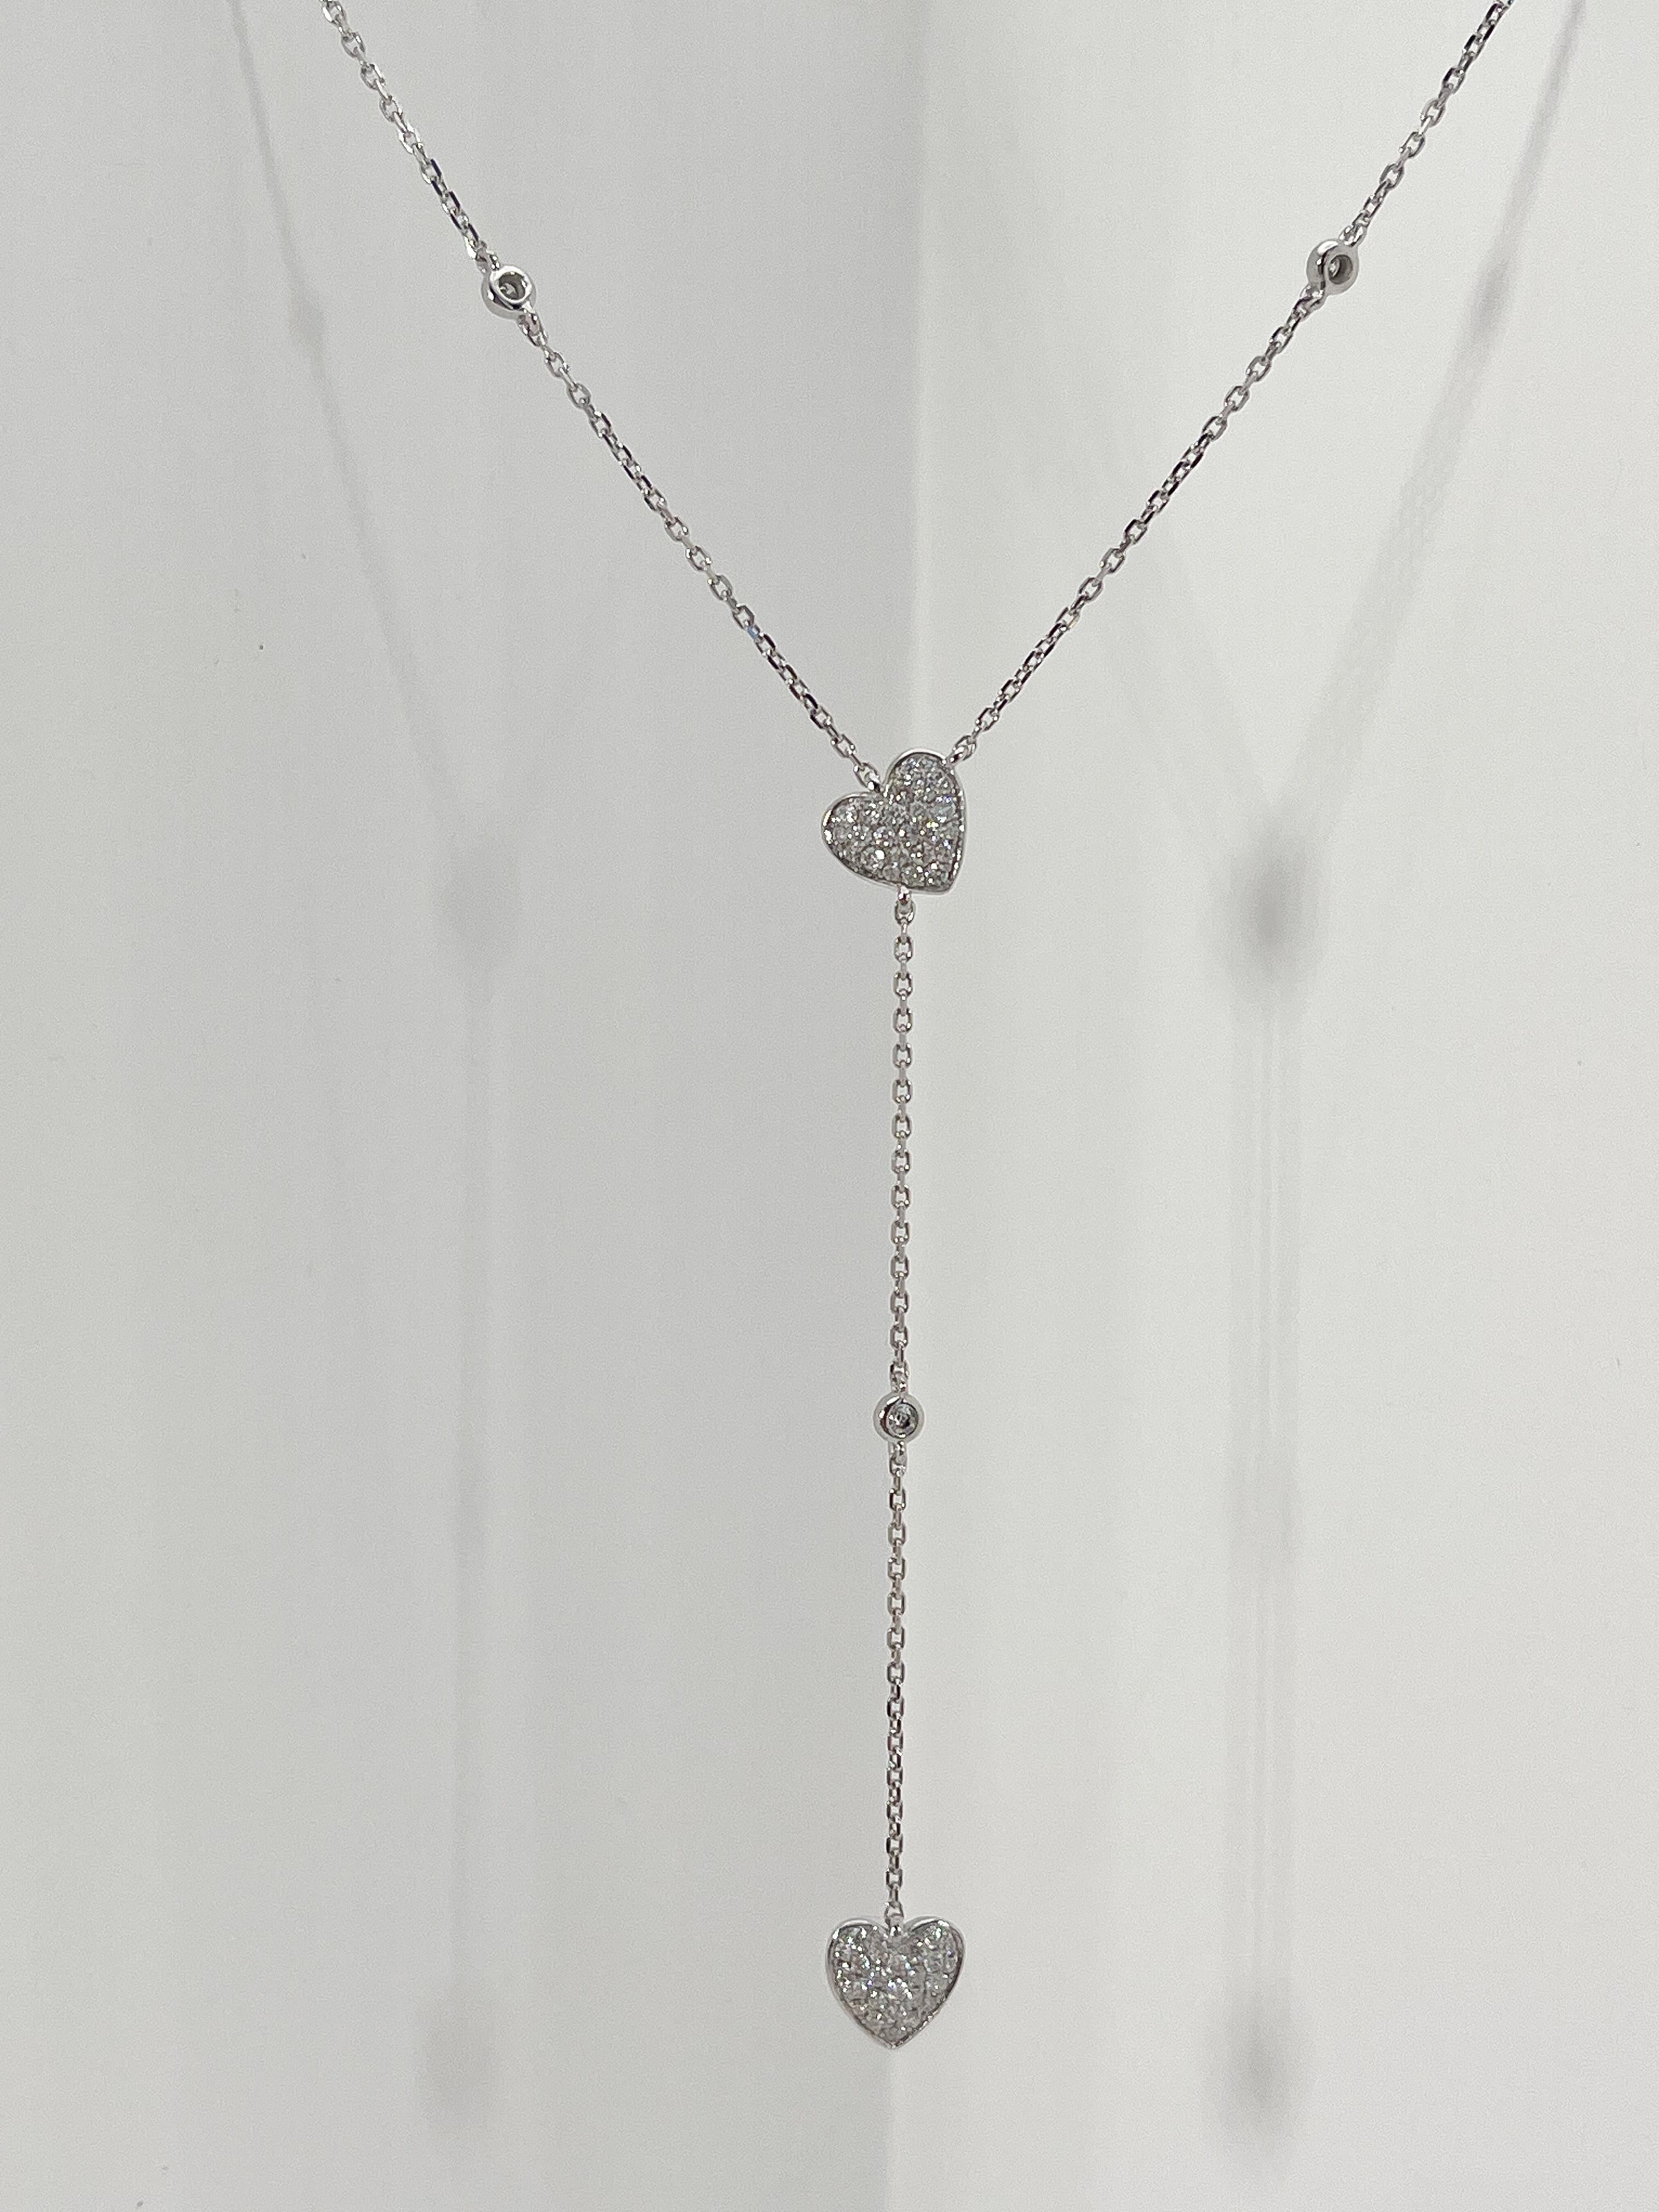 14k white gold drop necklace with round diamonds in the hearts and 3 round diamond stations, diamonds have a total carat weight of .28, the necklace is 16 inches with an extension at 17 and 18, chain is a diamond cut cable, has a lobster claw to